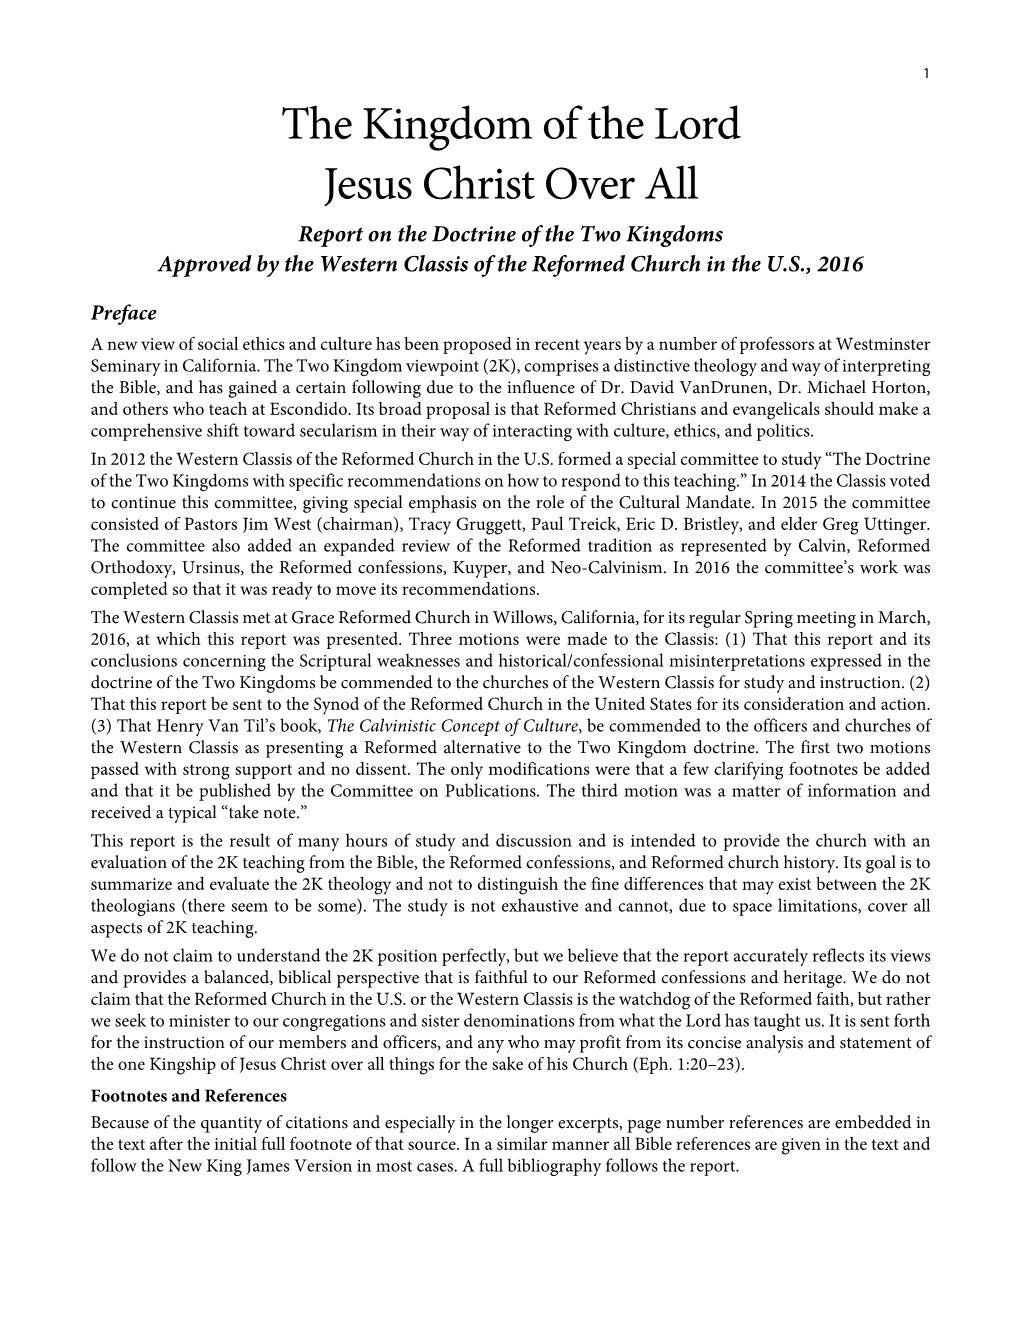 The Kingdom of the Lord Jesus Christ Over All Report on the Doctrine of the Two Kingdoms Approved by the Western Classis of the Reformed Church in the U.S., 2016